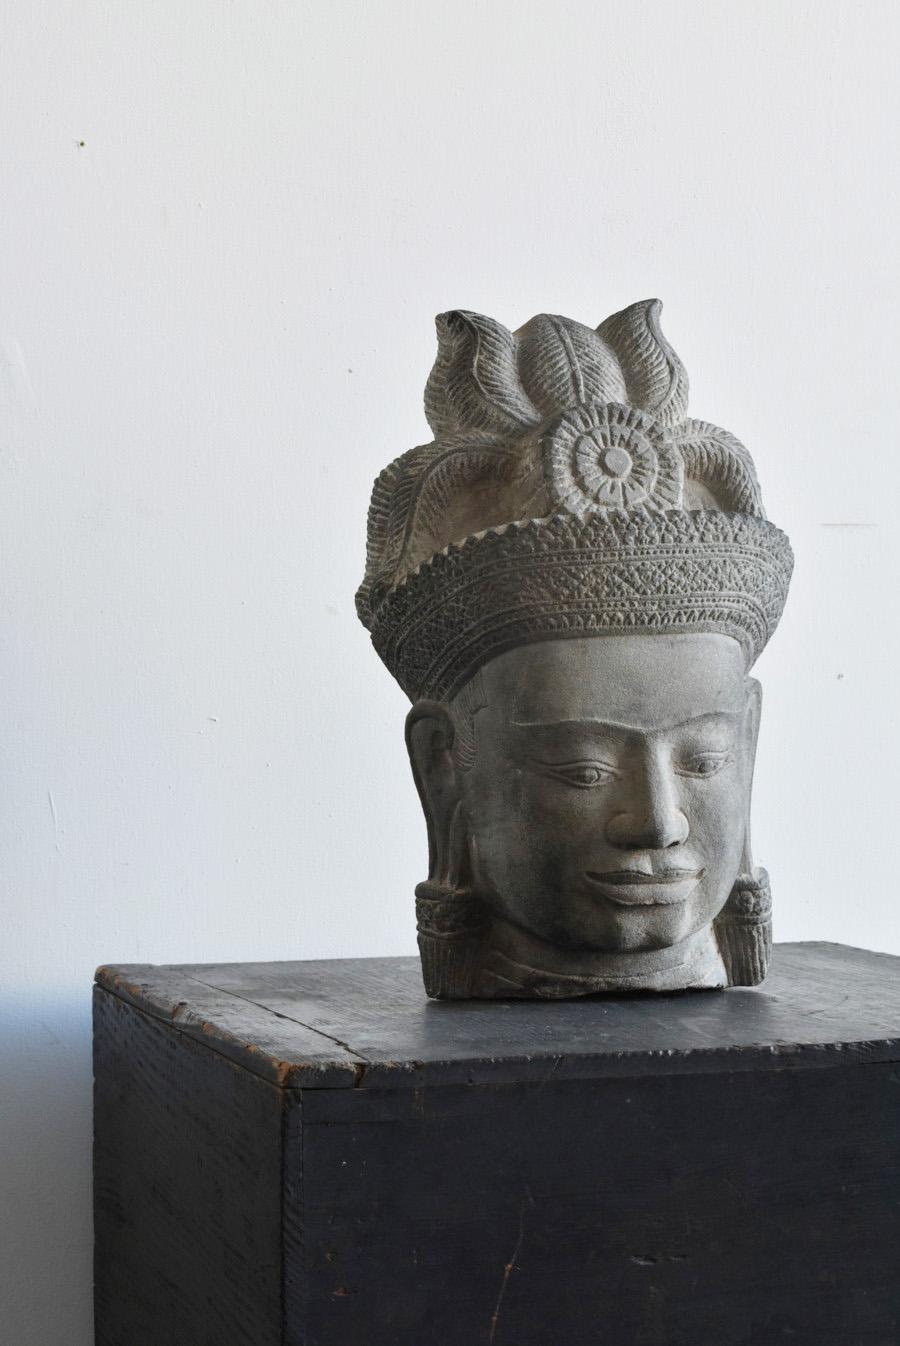 I would like to introduce some very nice items.
This is a stone Buddha head from Cambodia's Khmer Dynasty, made around the 14th and 15th centuries.
The Khmer Dynasty was a large dynasty spanning Cambodia and Thailand that prospered from the 9th